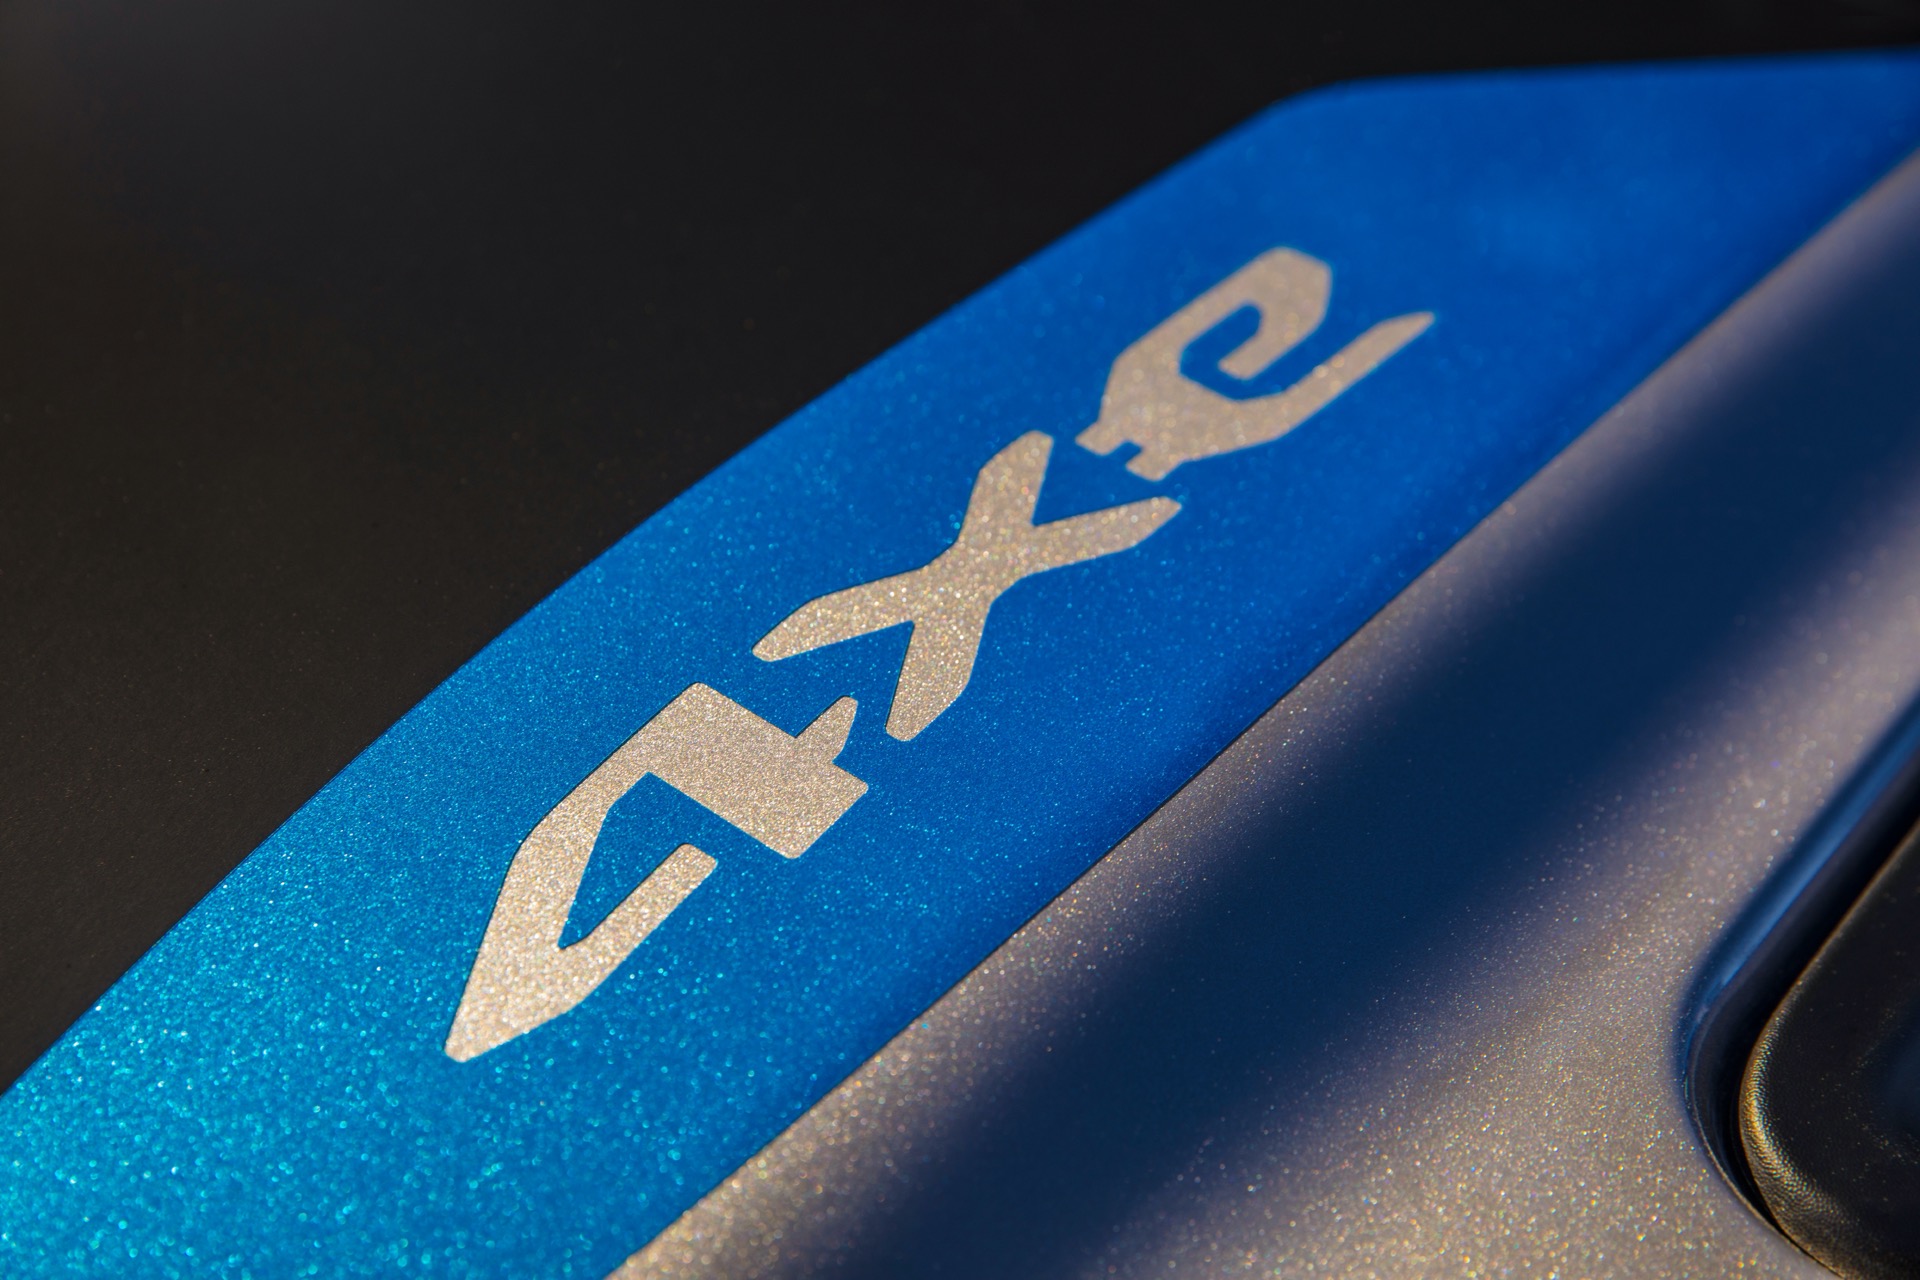 The 4xe Logo On The Hood Of The 2021 Jeep® Wrangler Lets The Body Color Show Through.